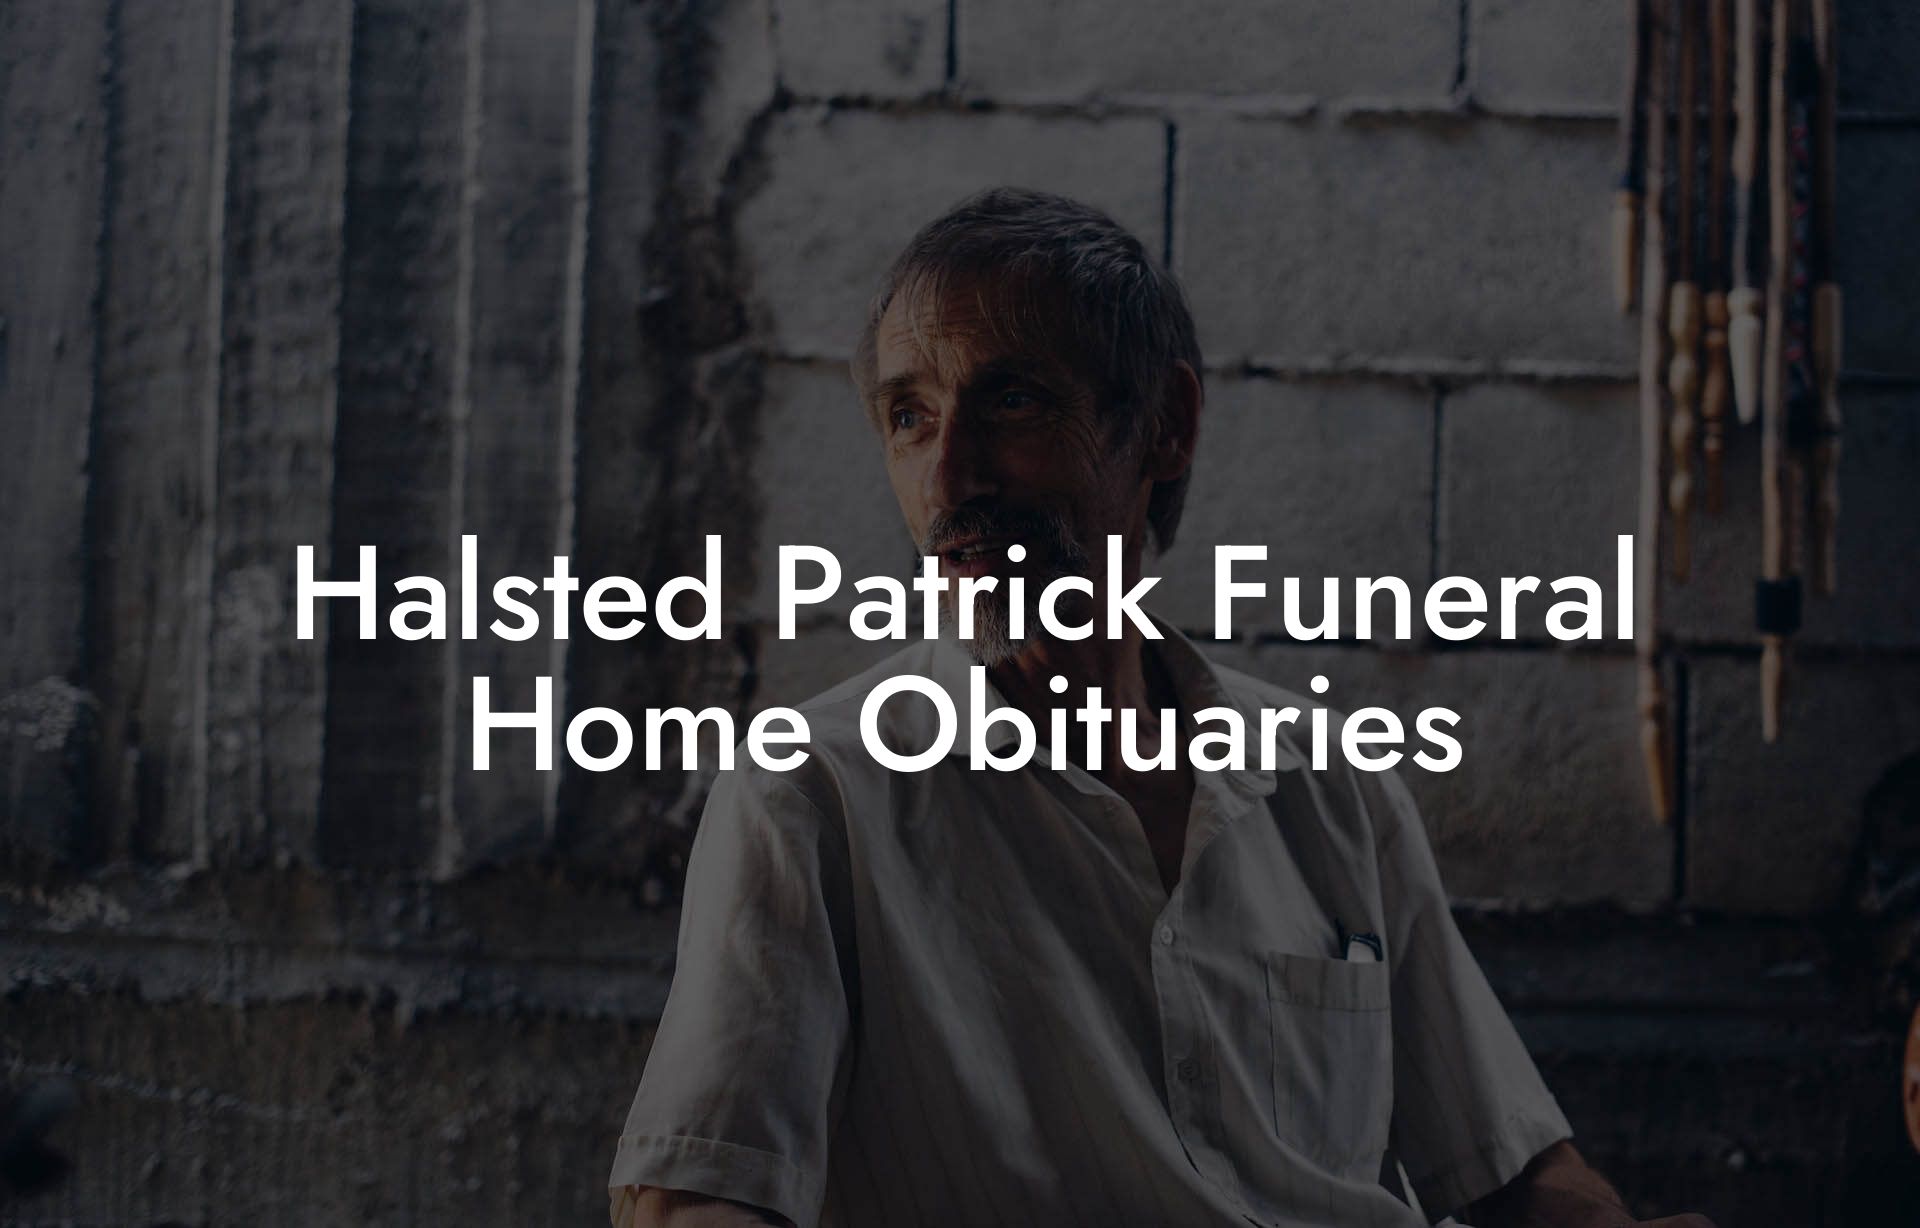 Halsted Patrick Funeral Home Obituaries